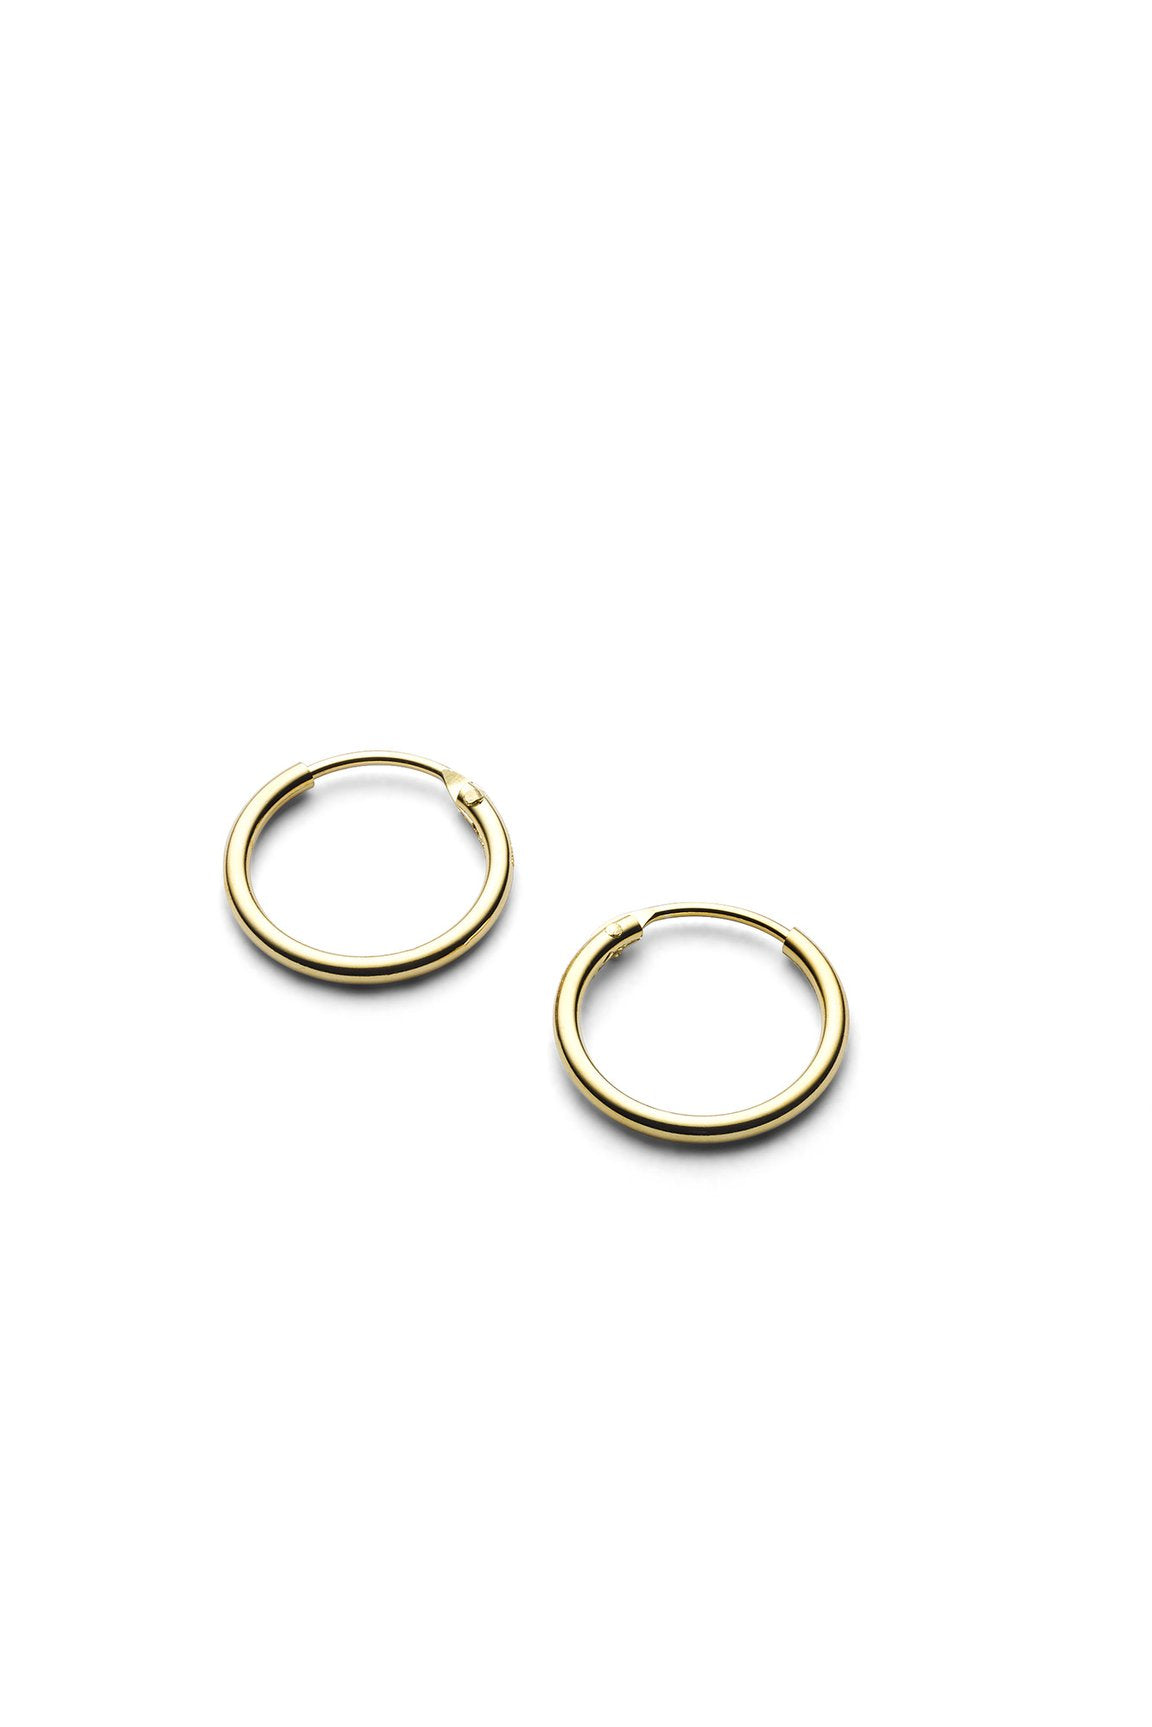 SMALL CREOL EARRINGS IN GOLD